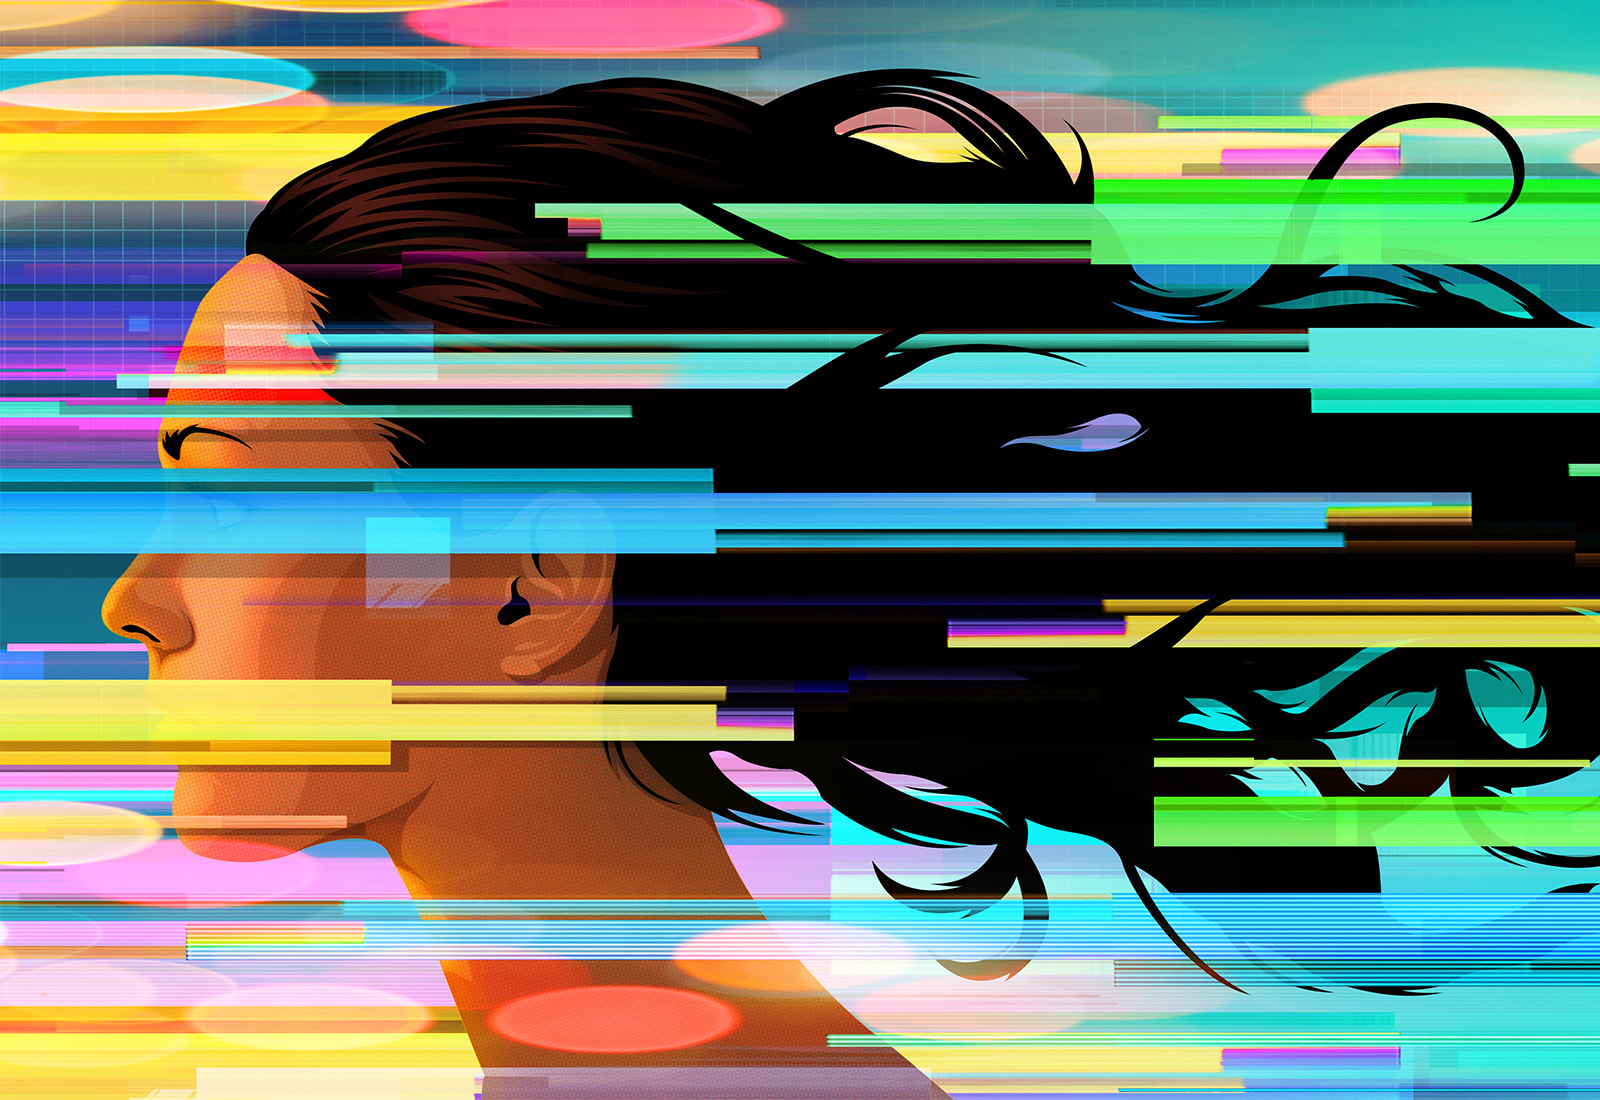 Colourful illustration of woman’s side profile with hair flowing behind her